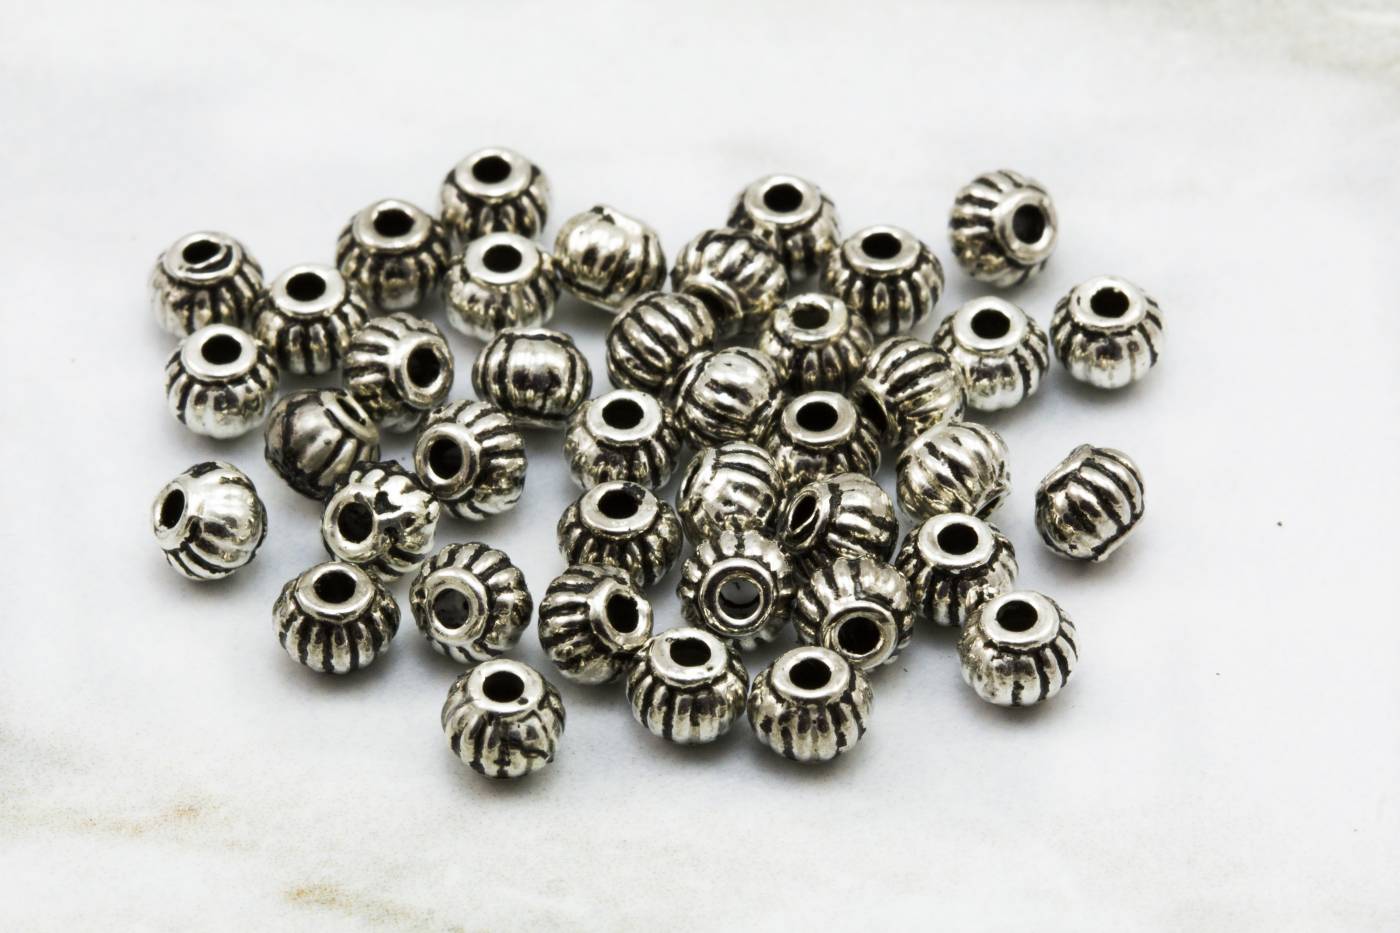 small-round-ball-jewelry-spacer-beads